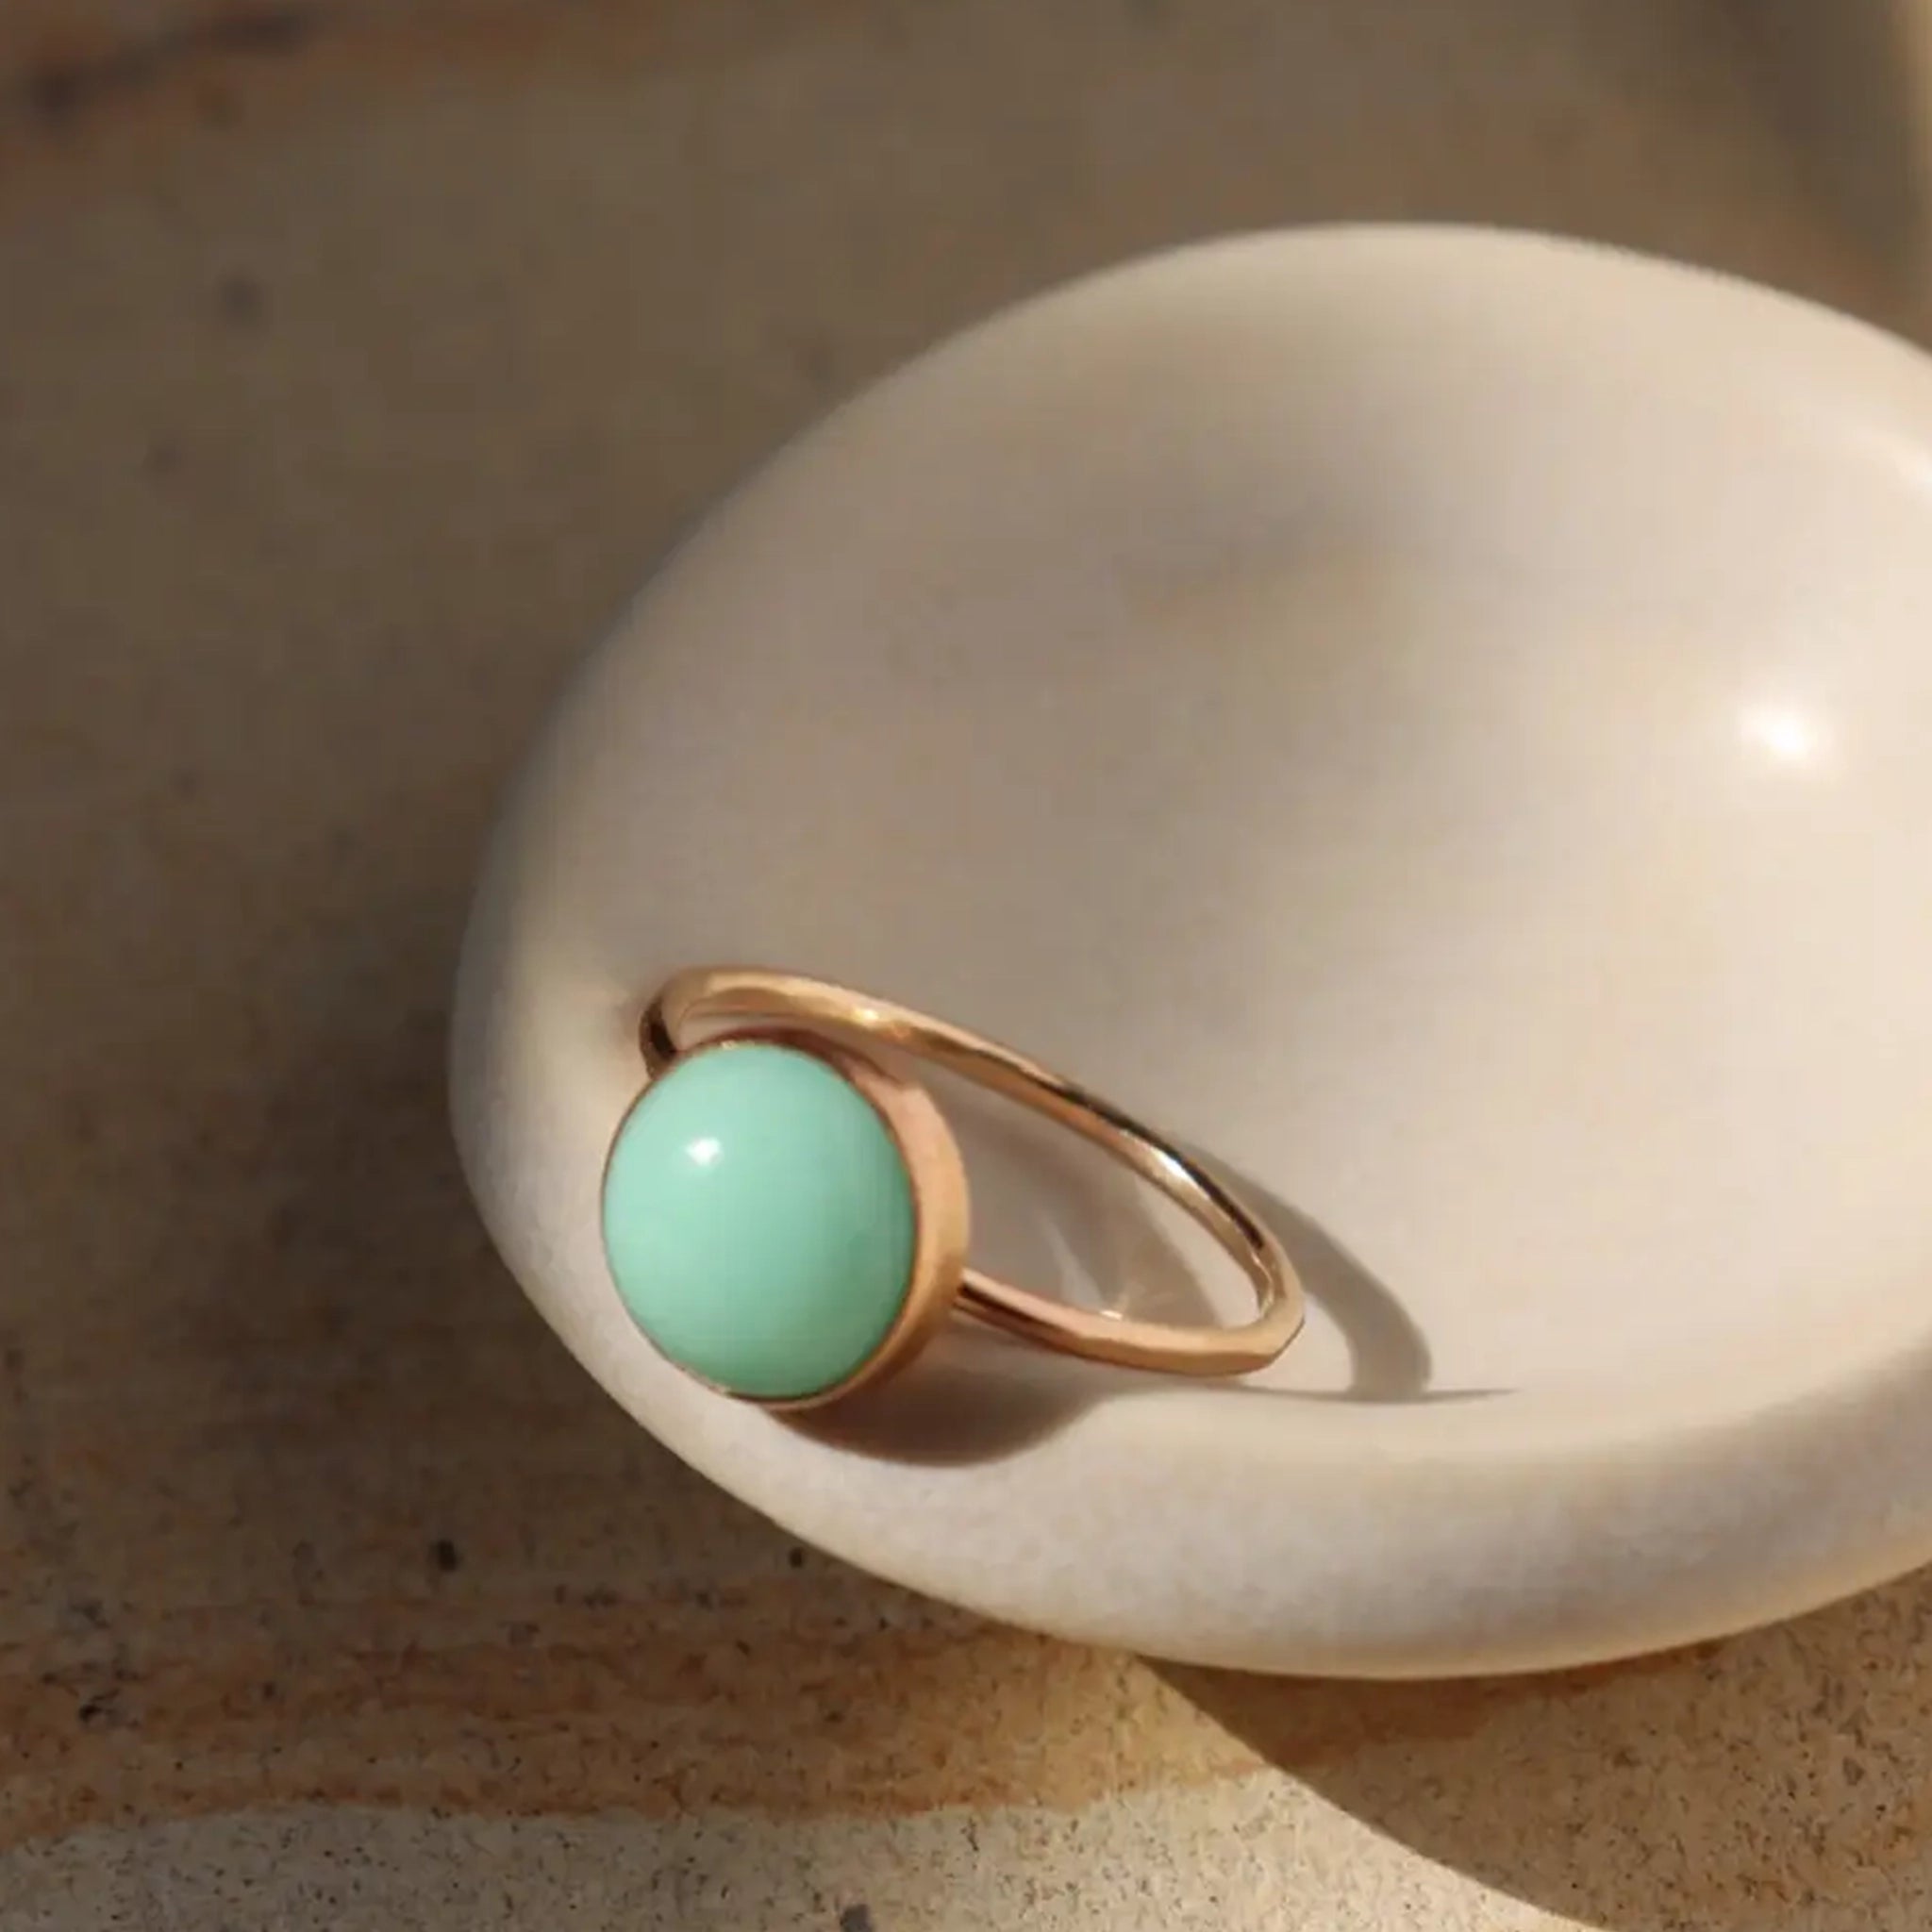 A thin gold ring with a green chrysoprase stone in the center. 